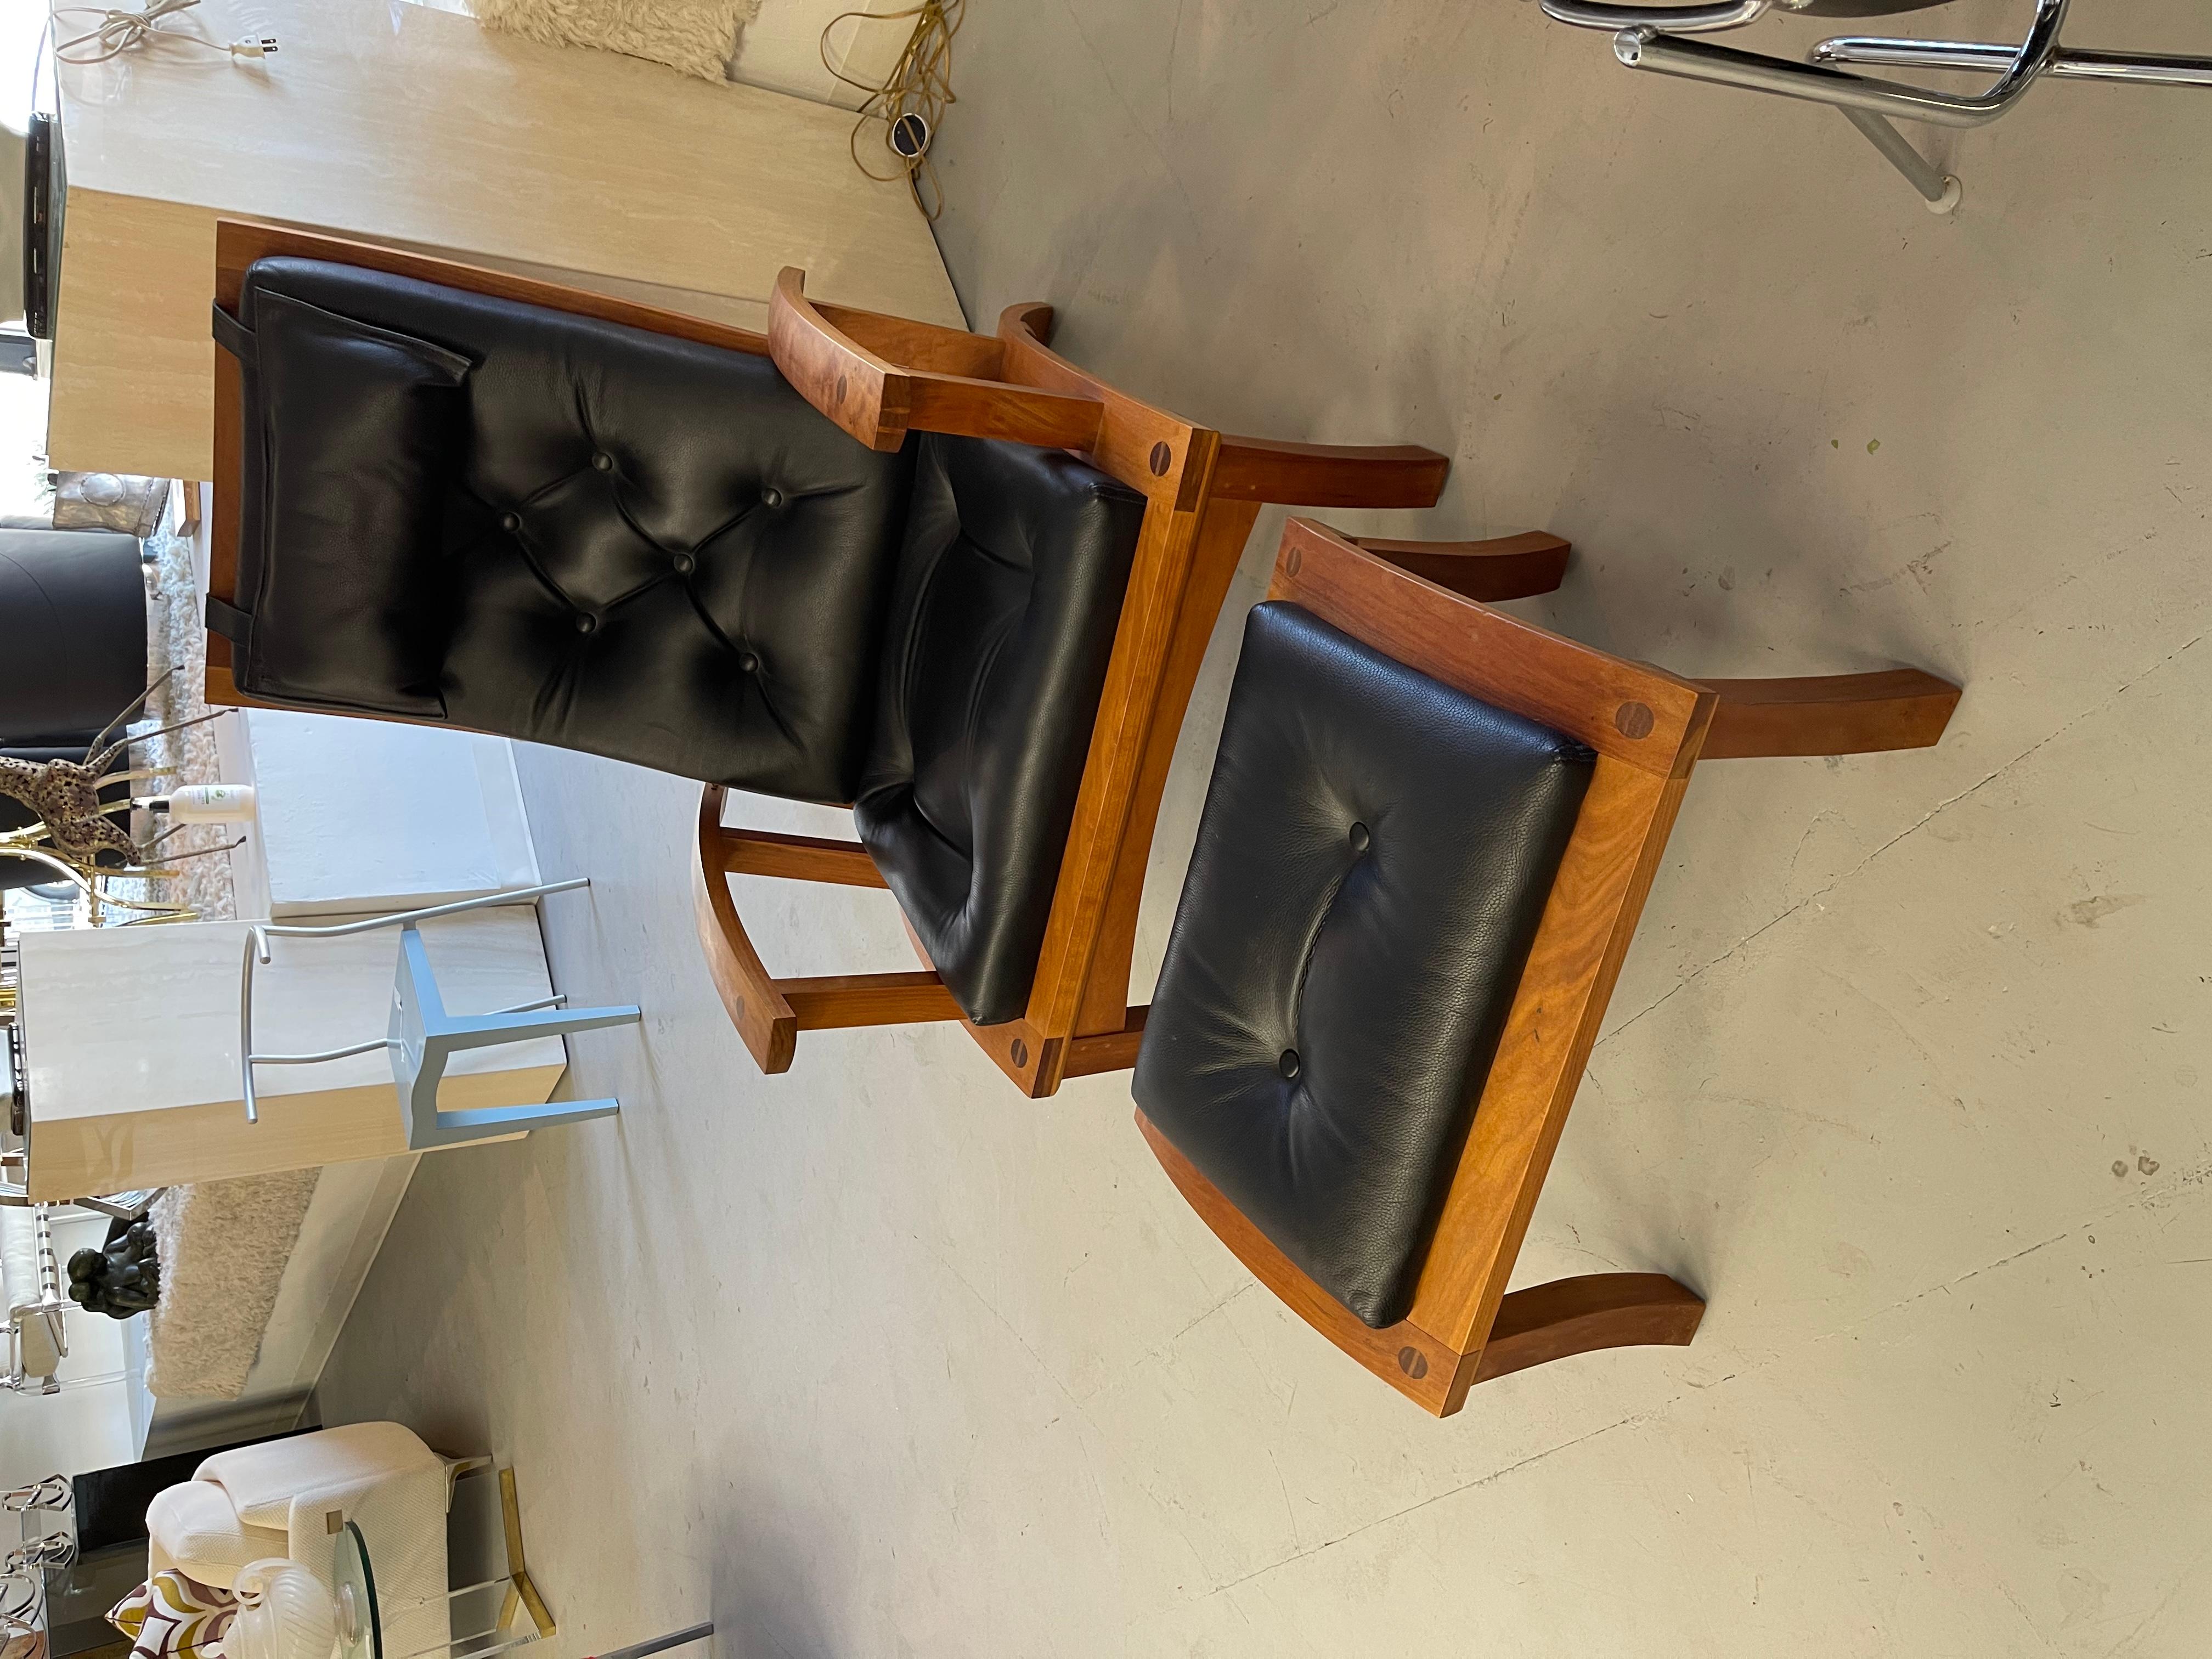 A nice Thomas Moser Lolling chair and ottoman with black leather cushions. Both pieces are signed and dated 2000. The chair is signed Michael Craig and the ottoman Ray Martin. There is a brass rod that adjusts the angle of the back. In good